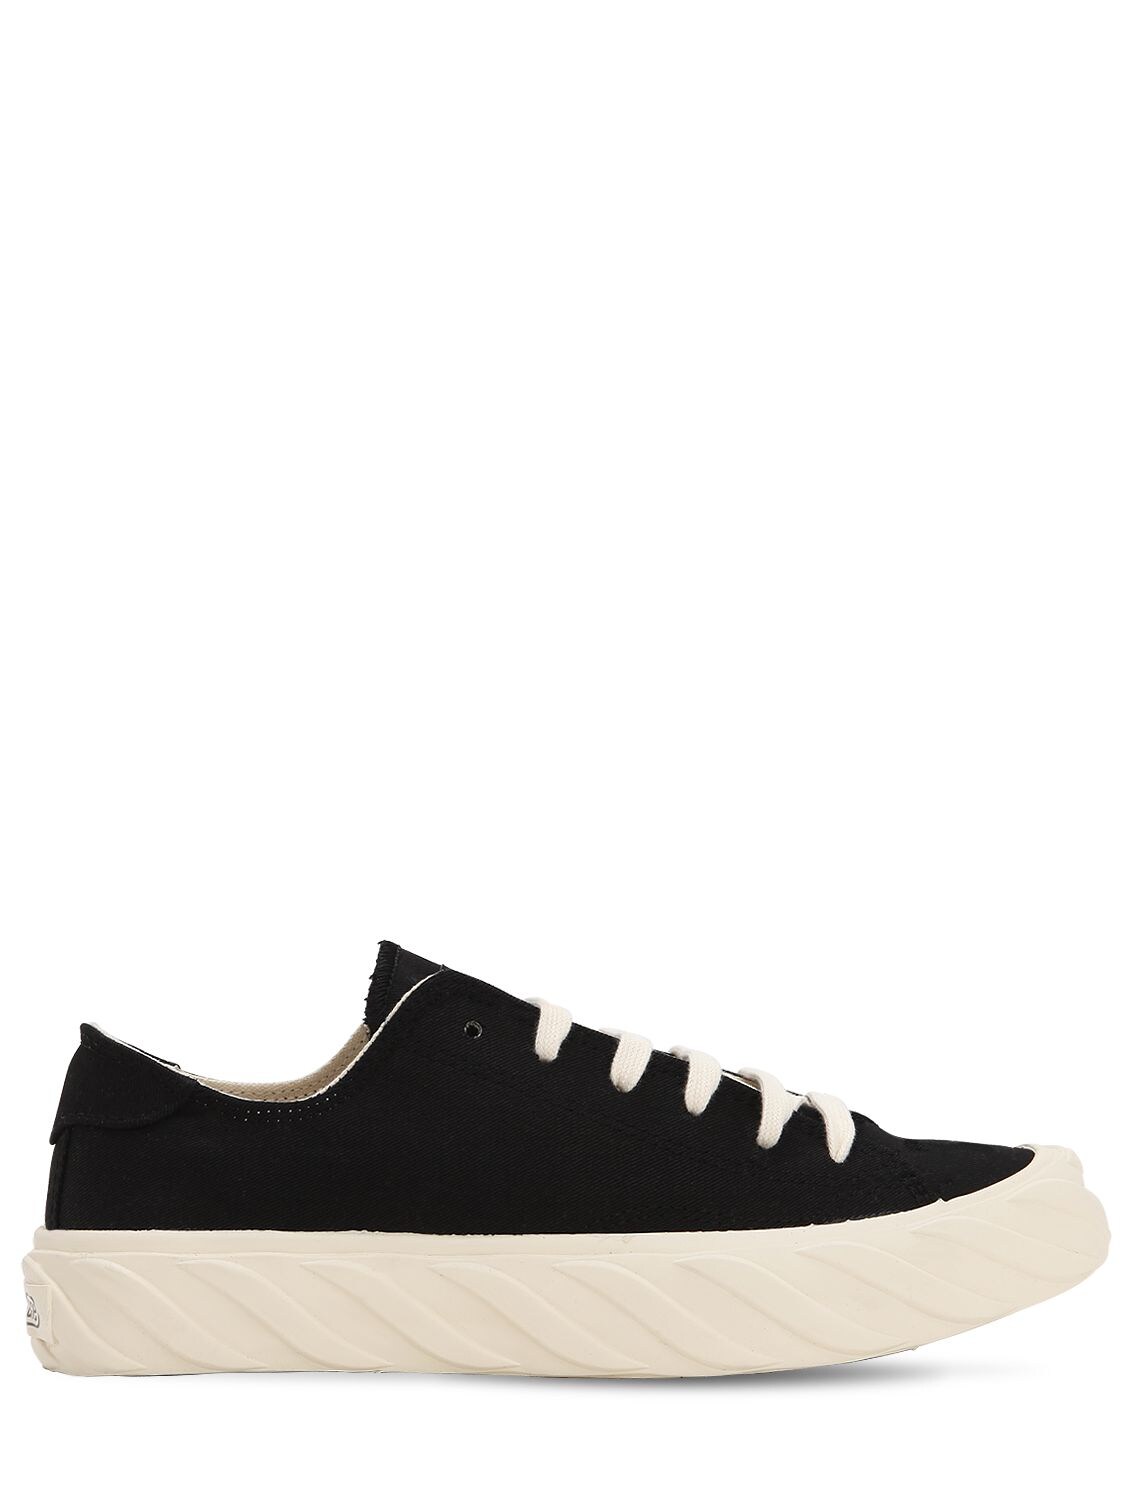 Age - Across To Genuine Era Age Cut Cotton Canvas Sneakers In Black